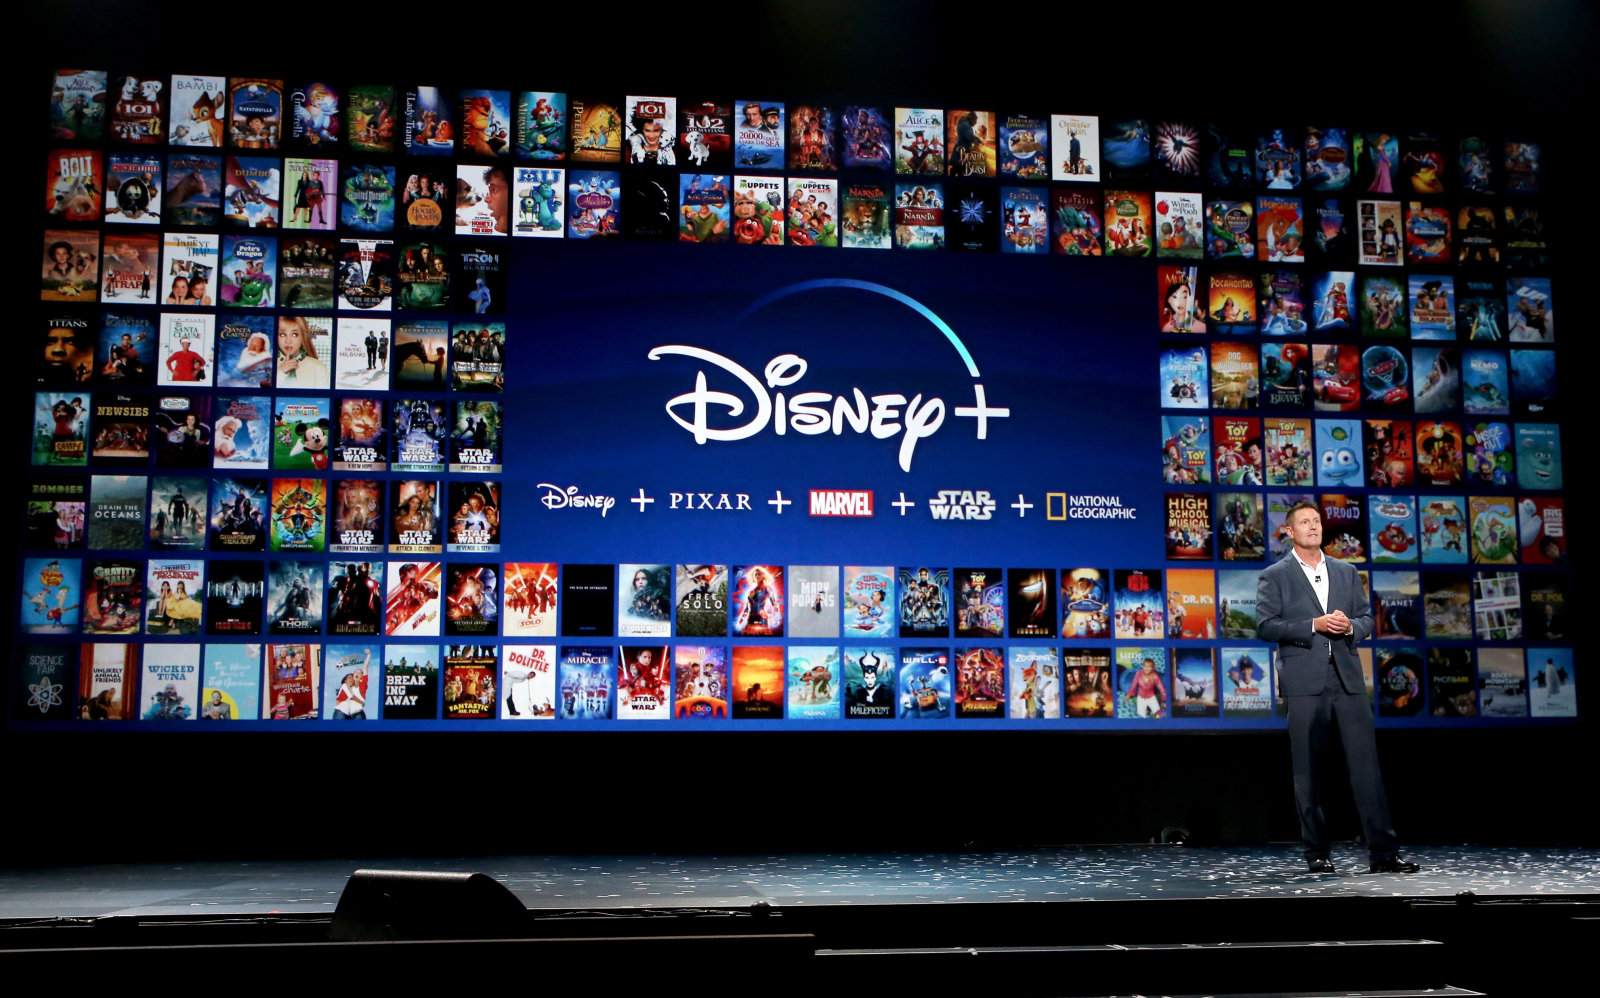 How Did the Disney+ Streaming Service Launch Do? Inquirer